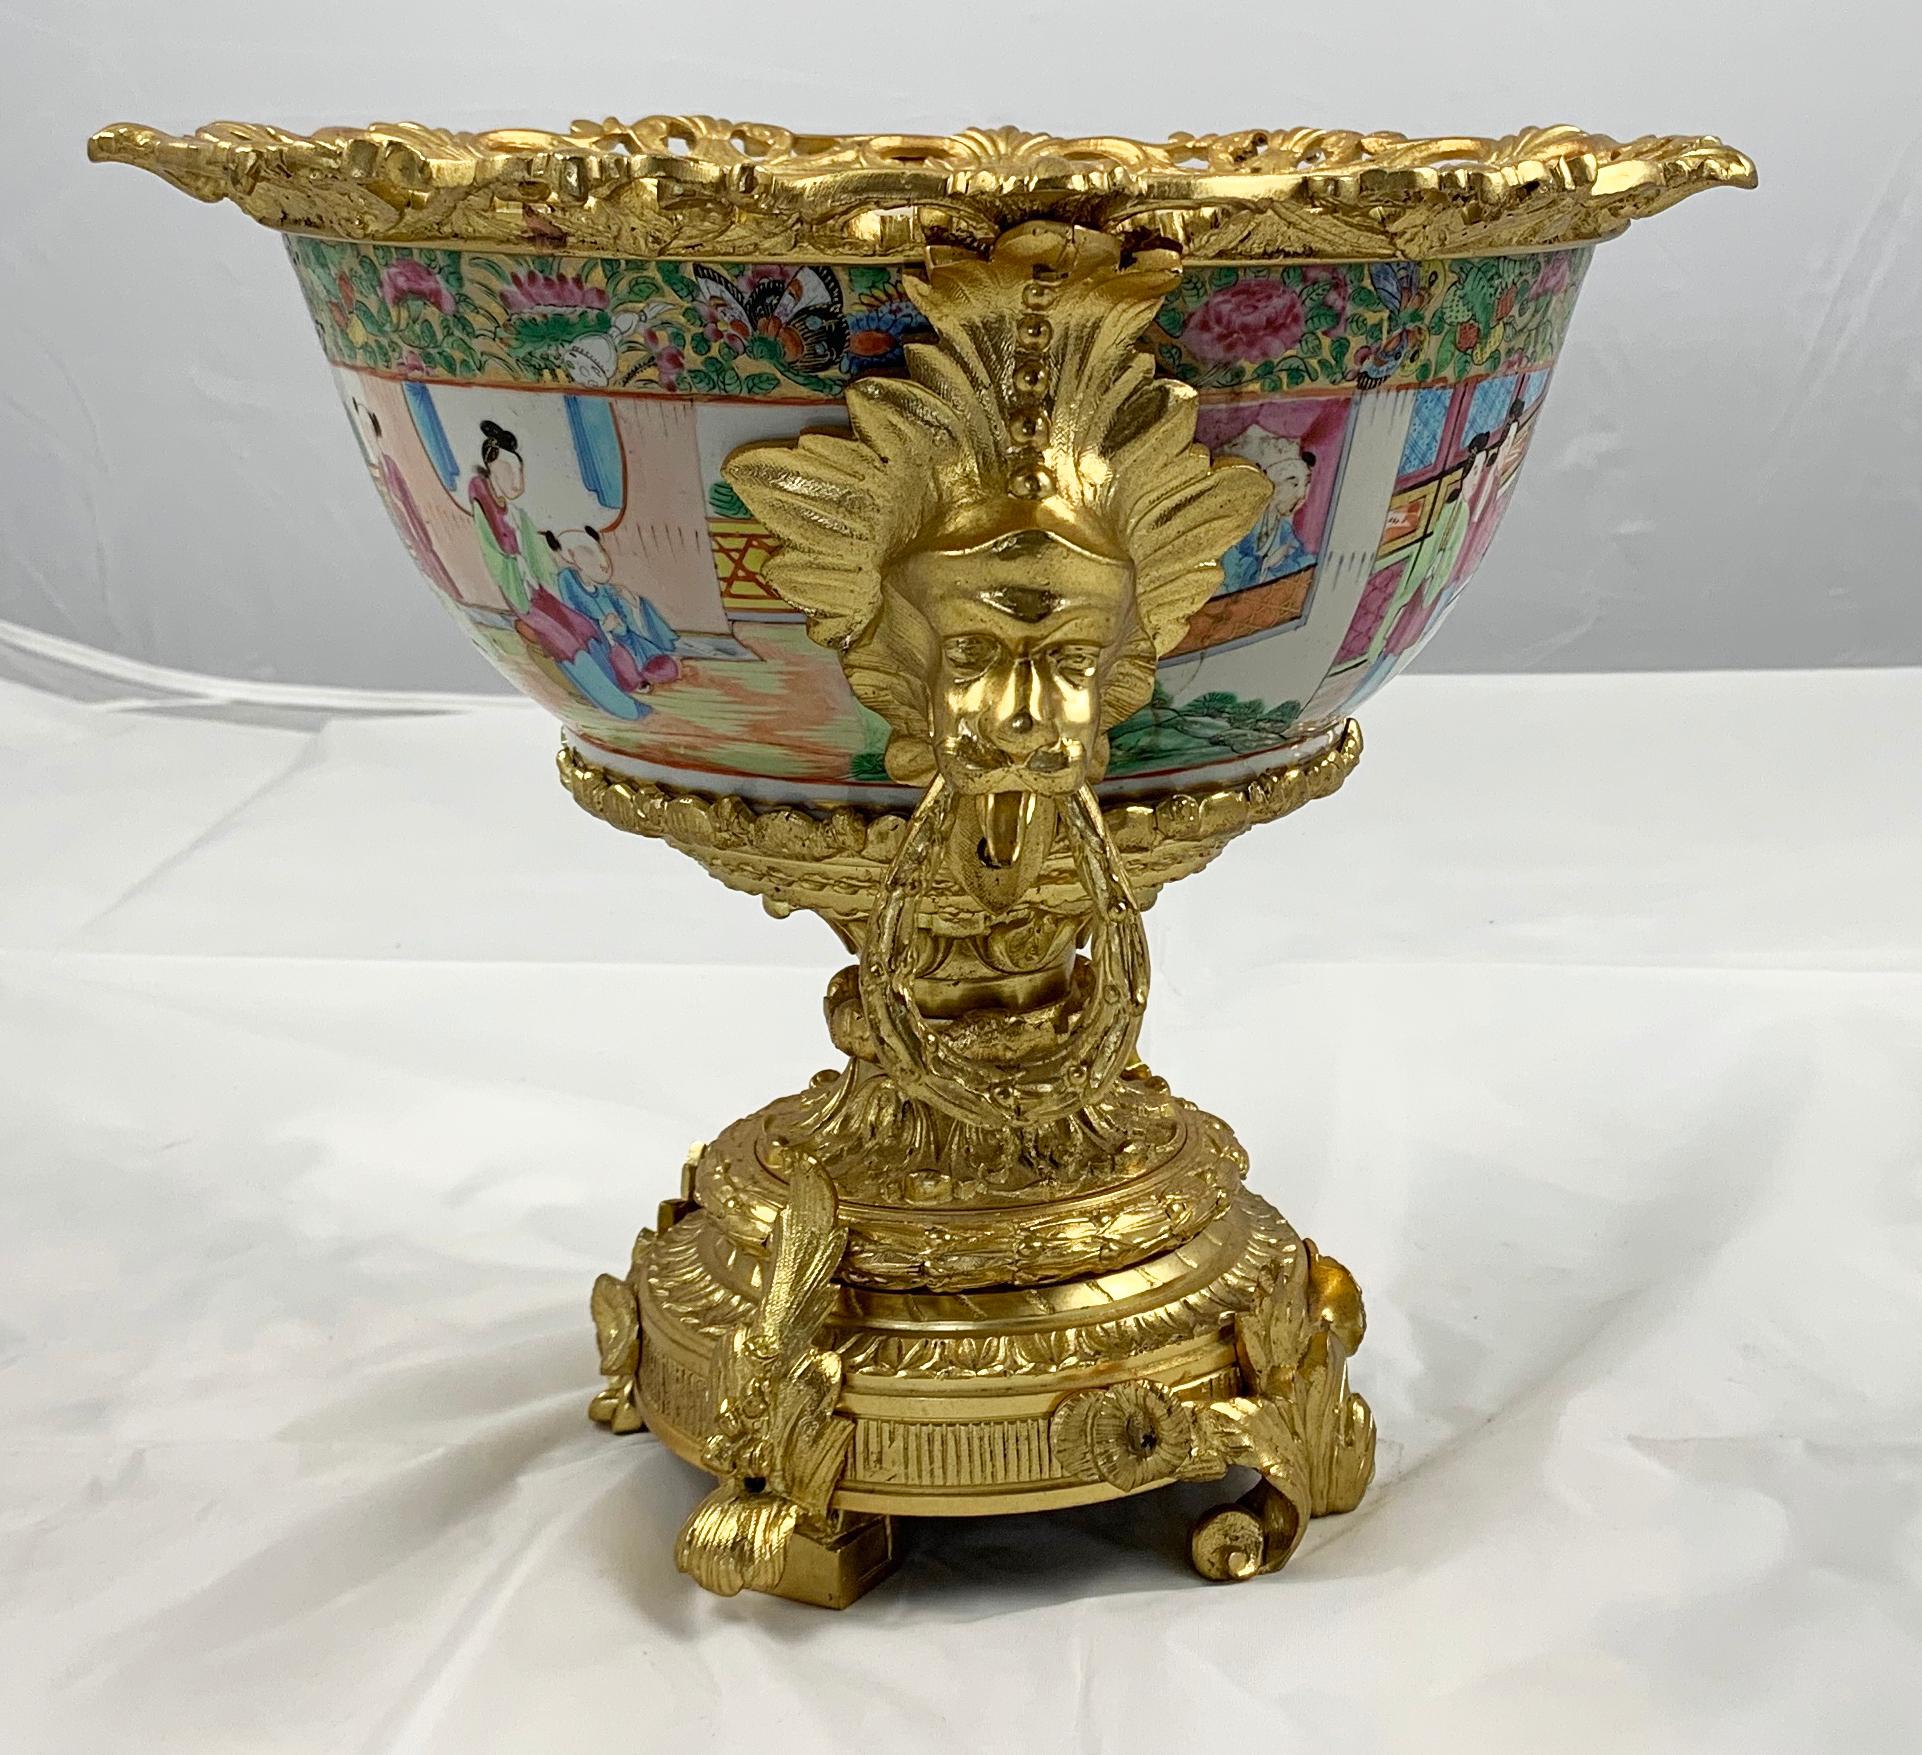 A fine Cantonese Famille rose and ormolu-mounted two handled Bowl, late 19th century. Decorated with figures in room scenes. The heavy ornate mounts cast with Classic motifs husks and foliage. On a massive base with knurled feet.